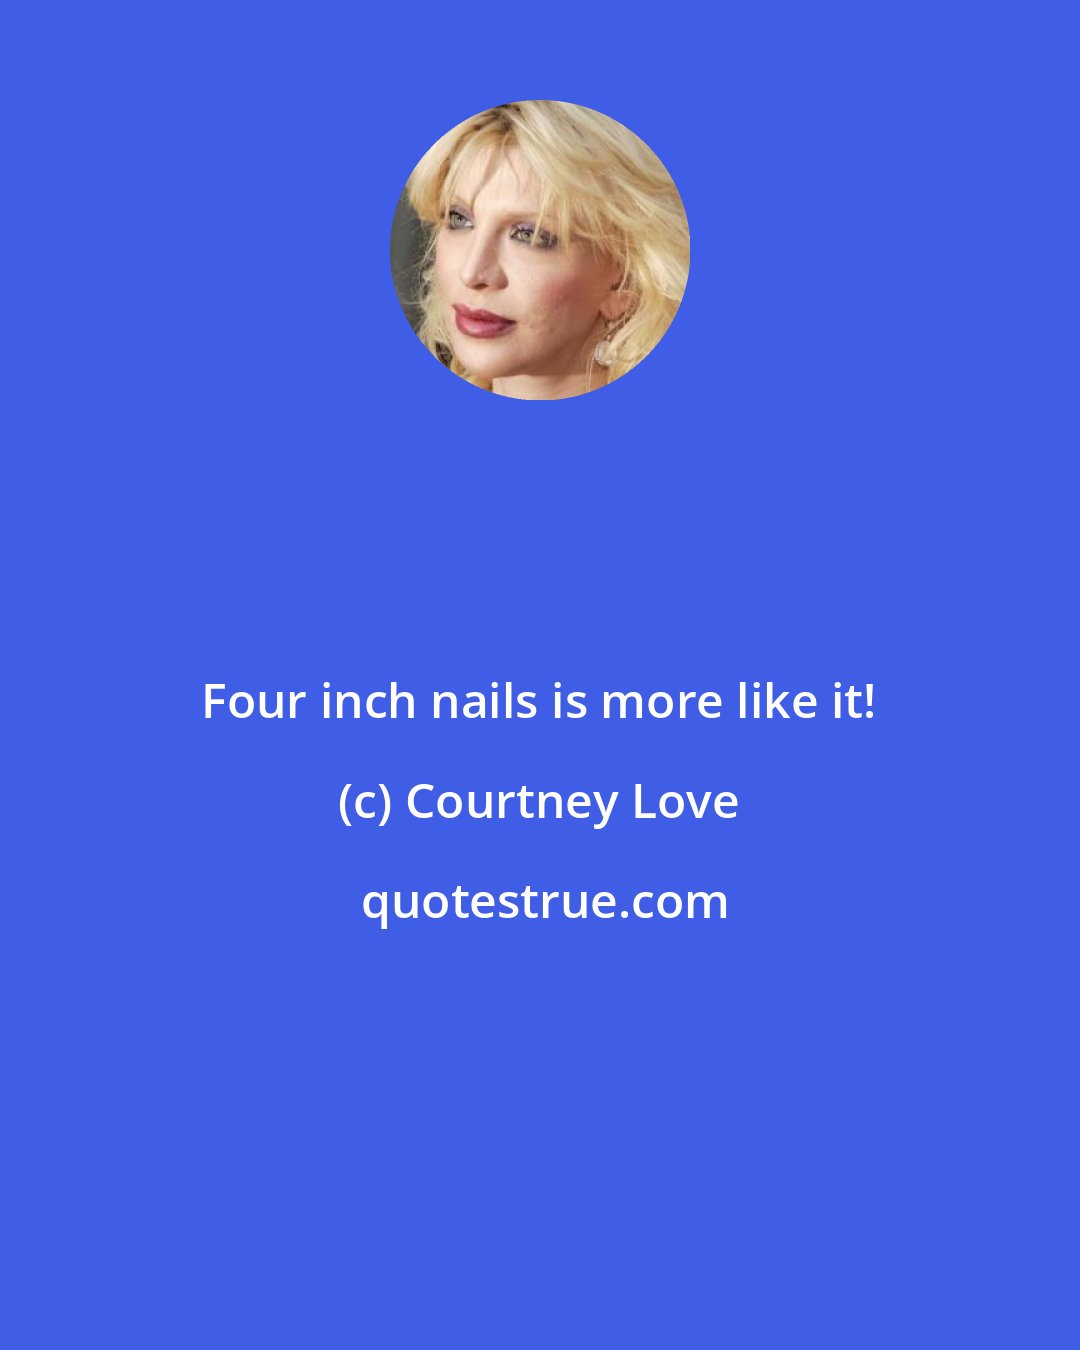 Courtney Love: Four inch nails is more like it!